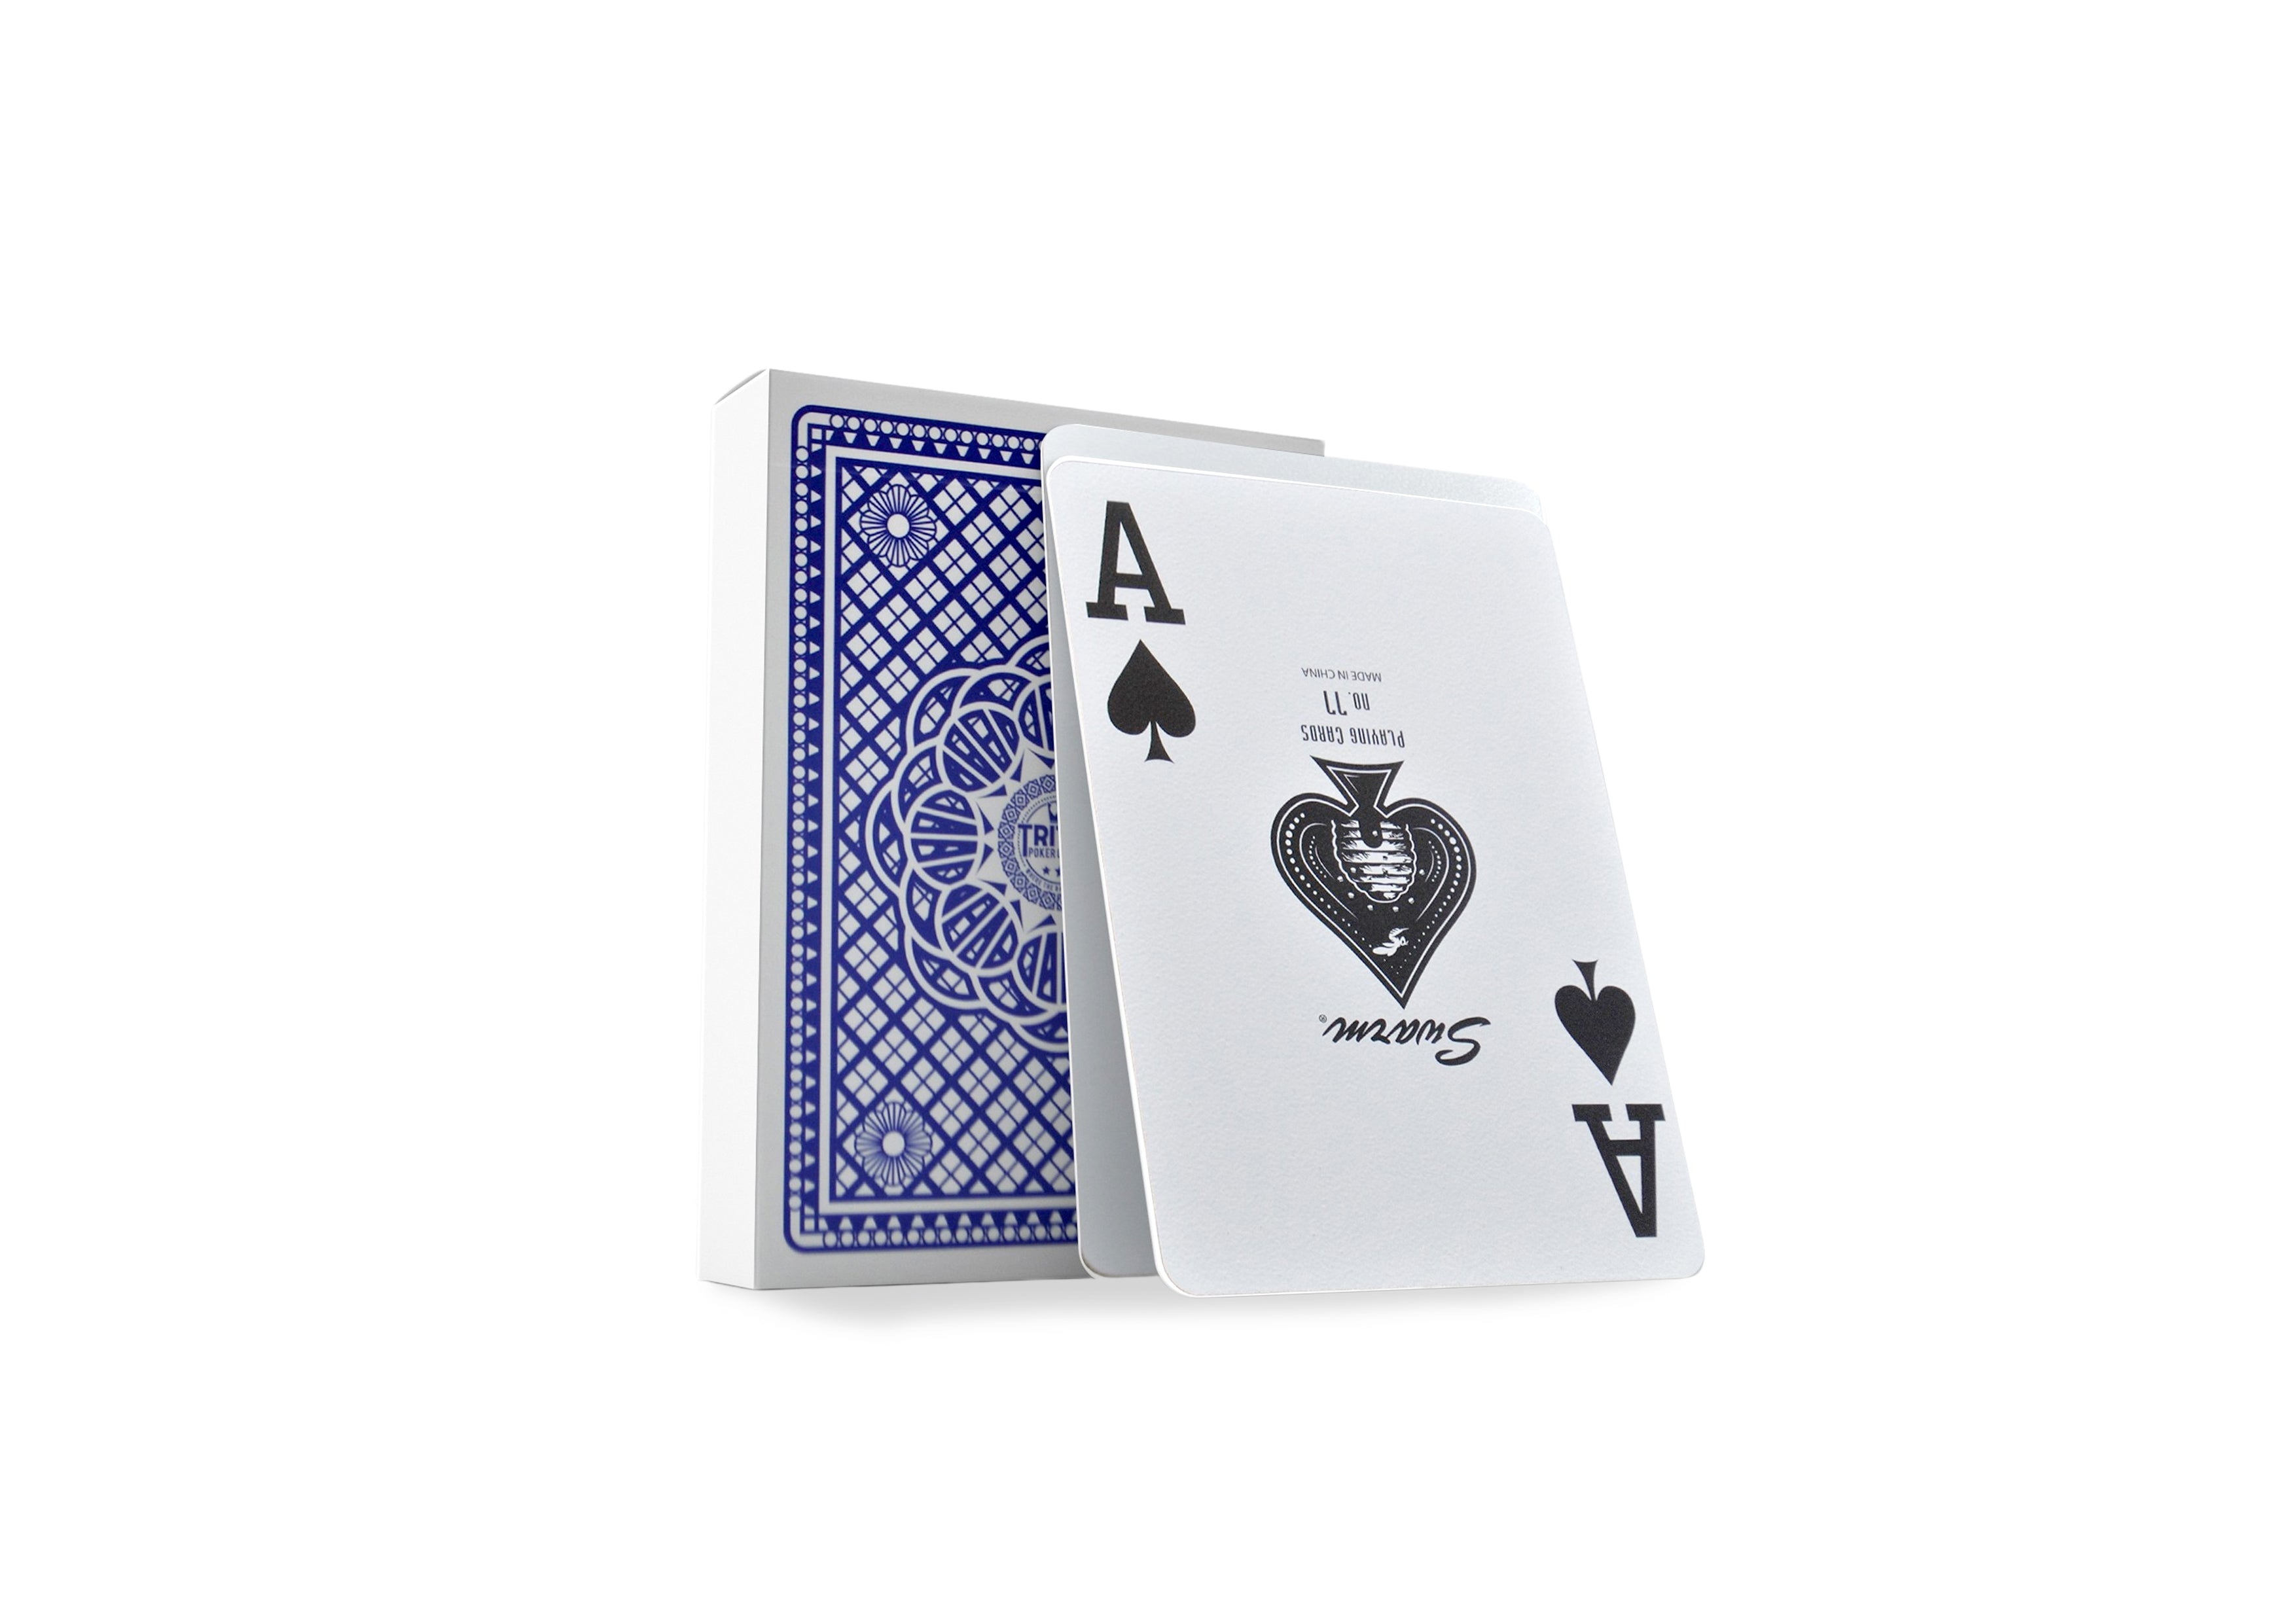 TRITON POKER TABLES PREMIUM POKER PLAYING CARDS WITH CUT CARD-SET OF 1